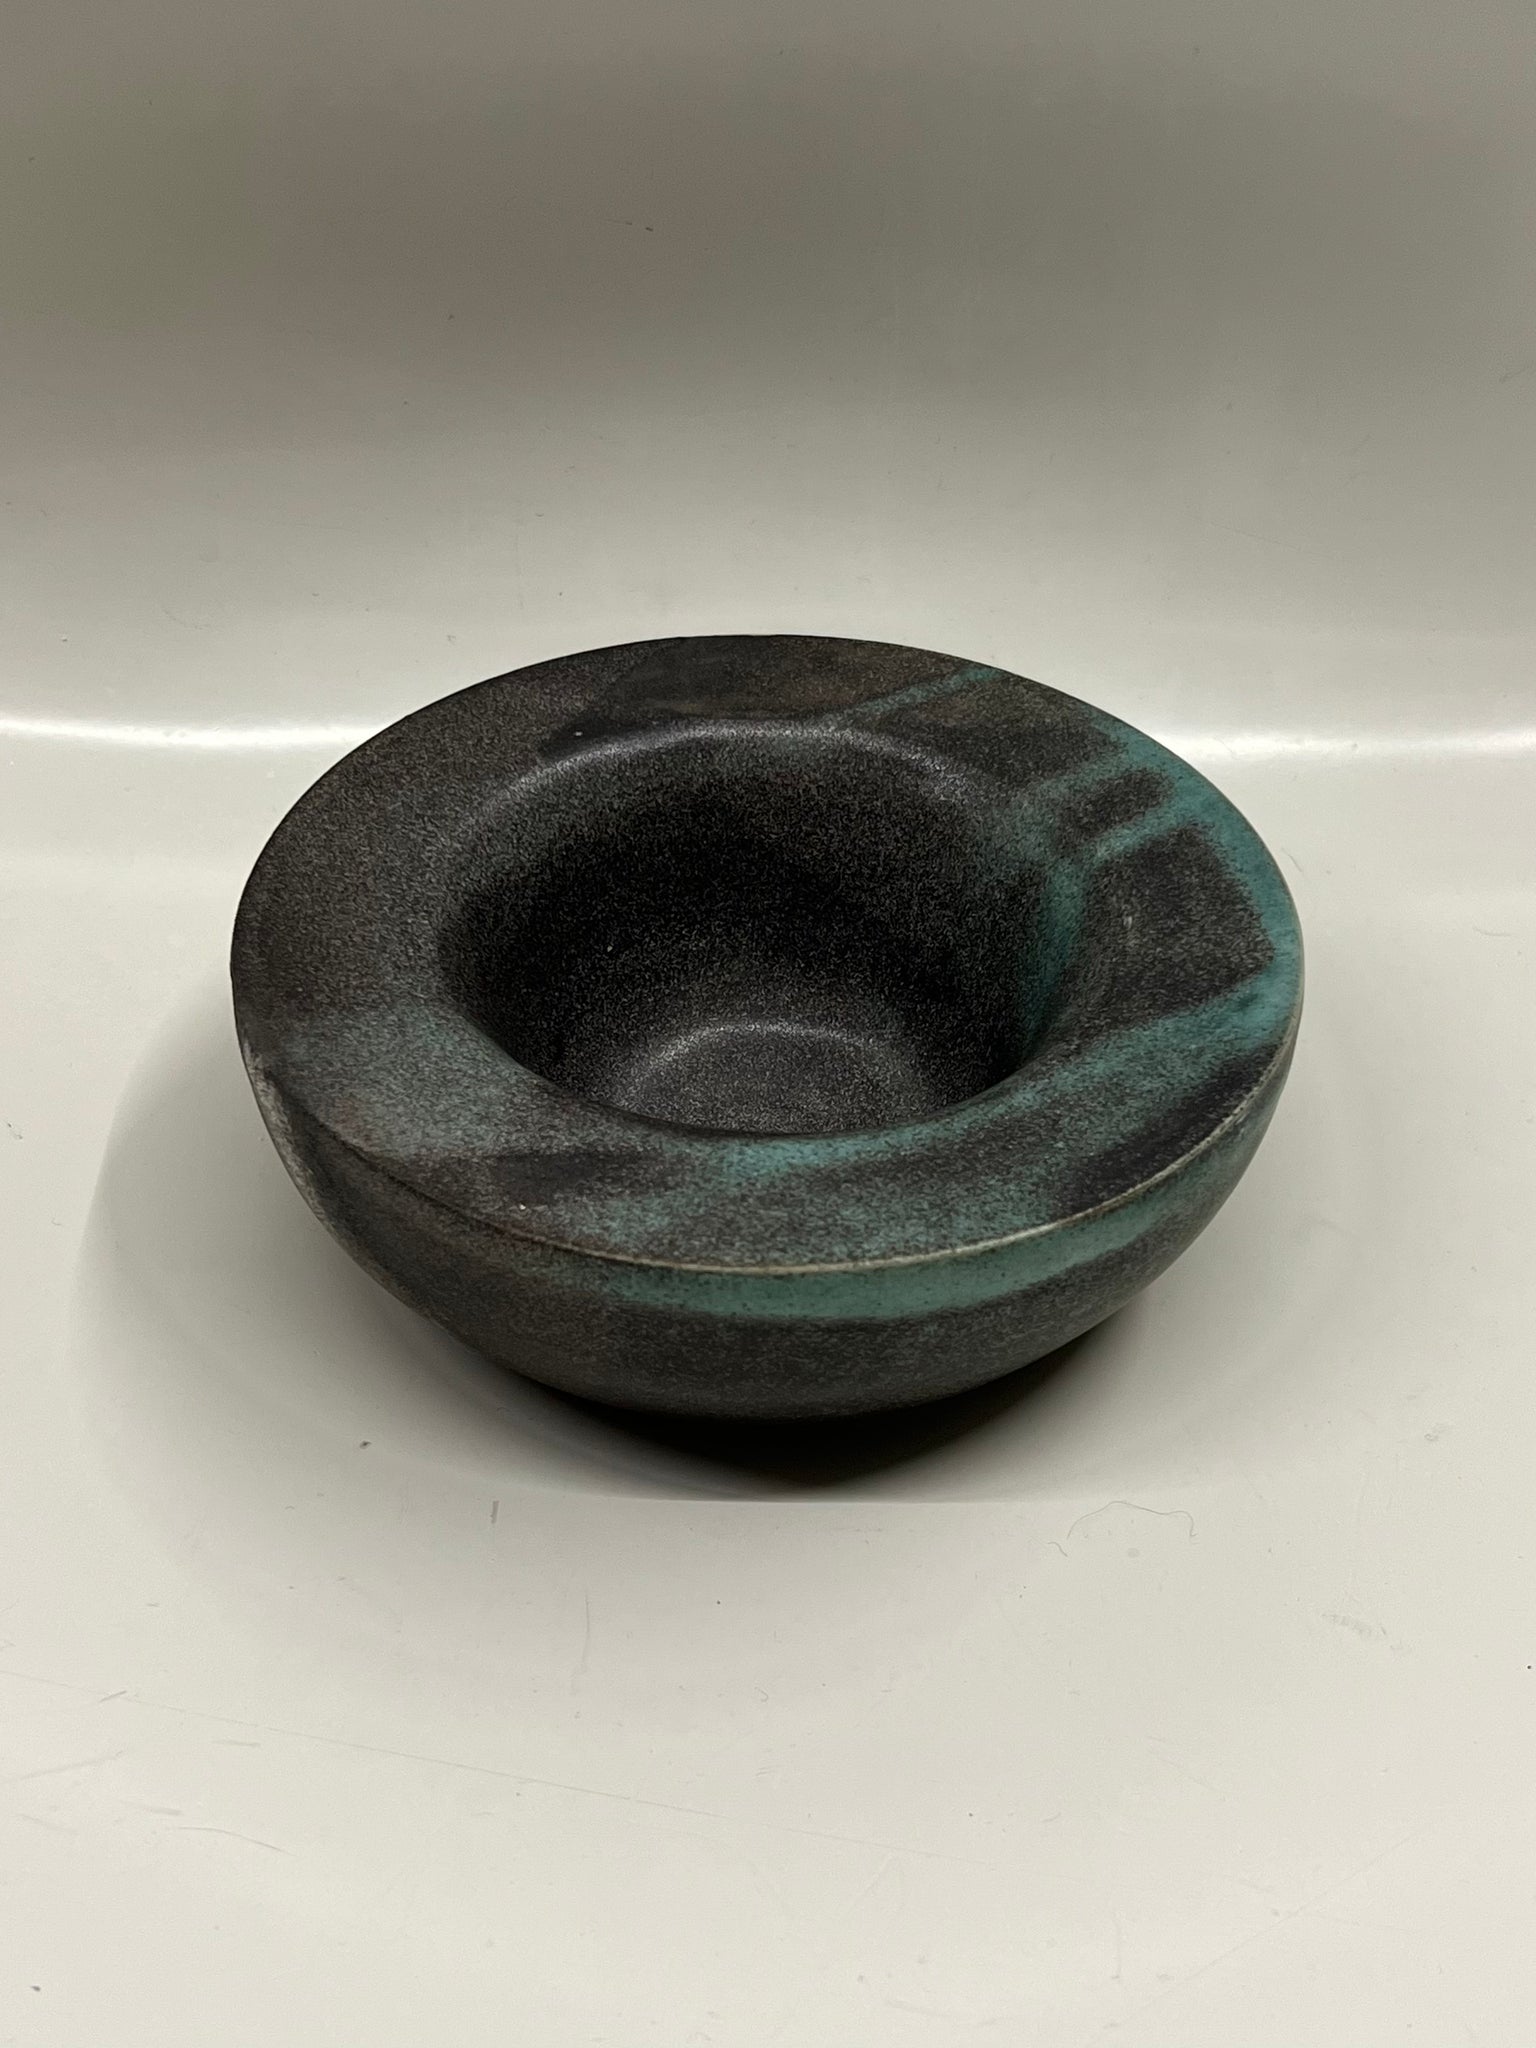 Massive bowl in green marbled by Hap Ceramics